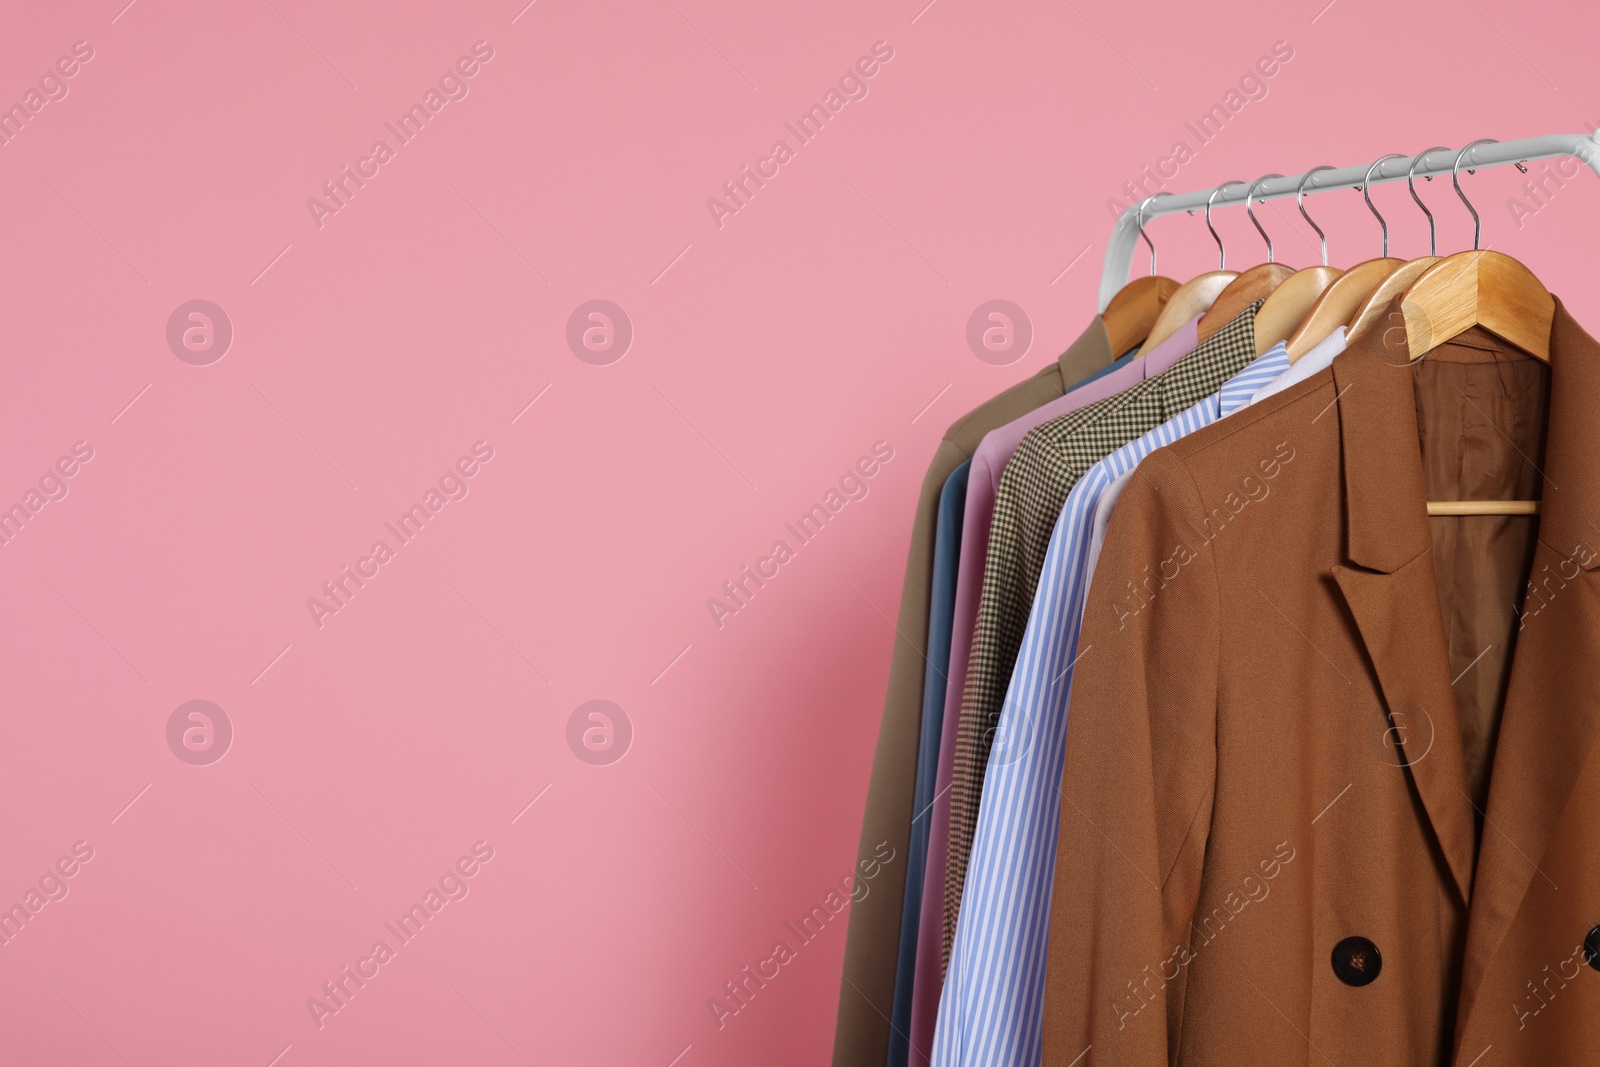 Photo of Rack with stylish clothes on wooden hangers against pink background, space for text